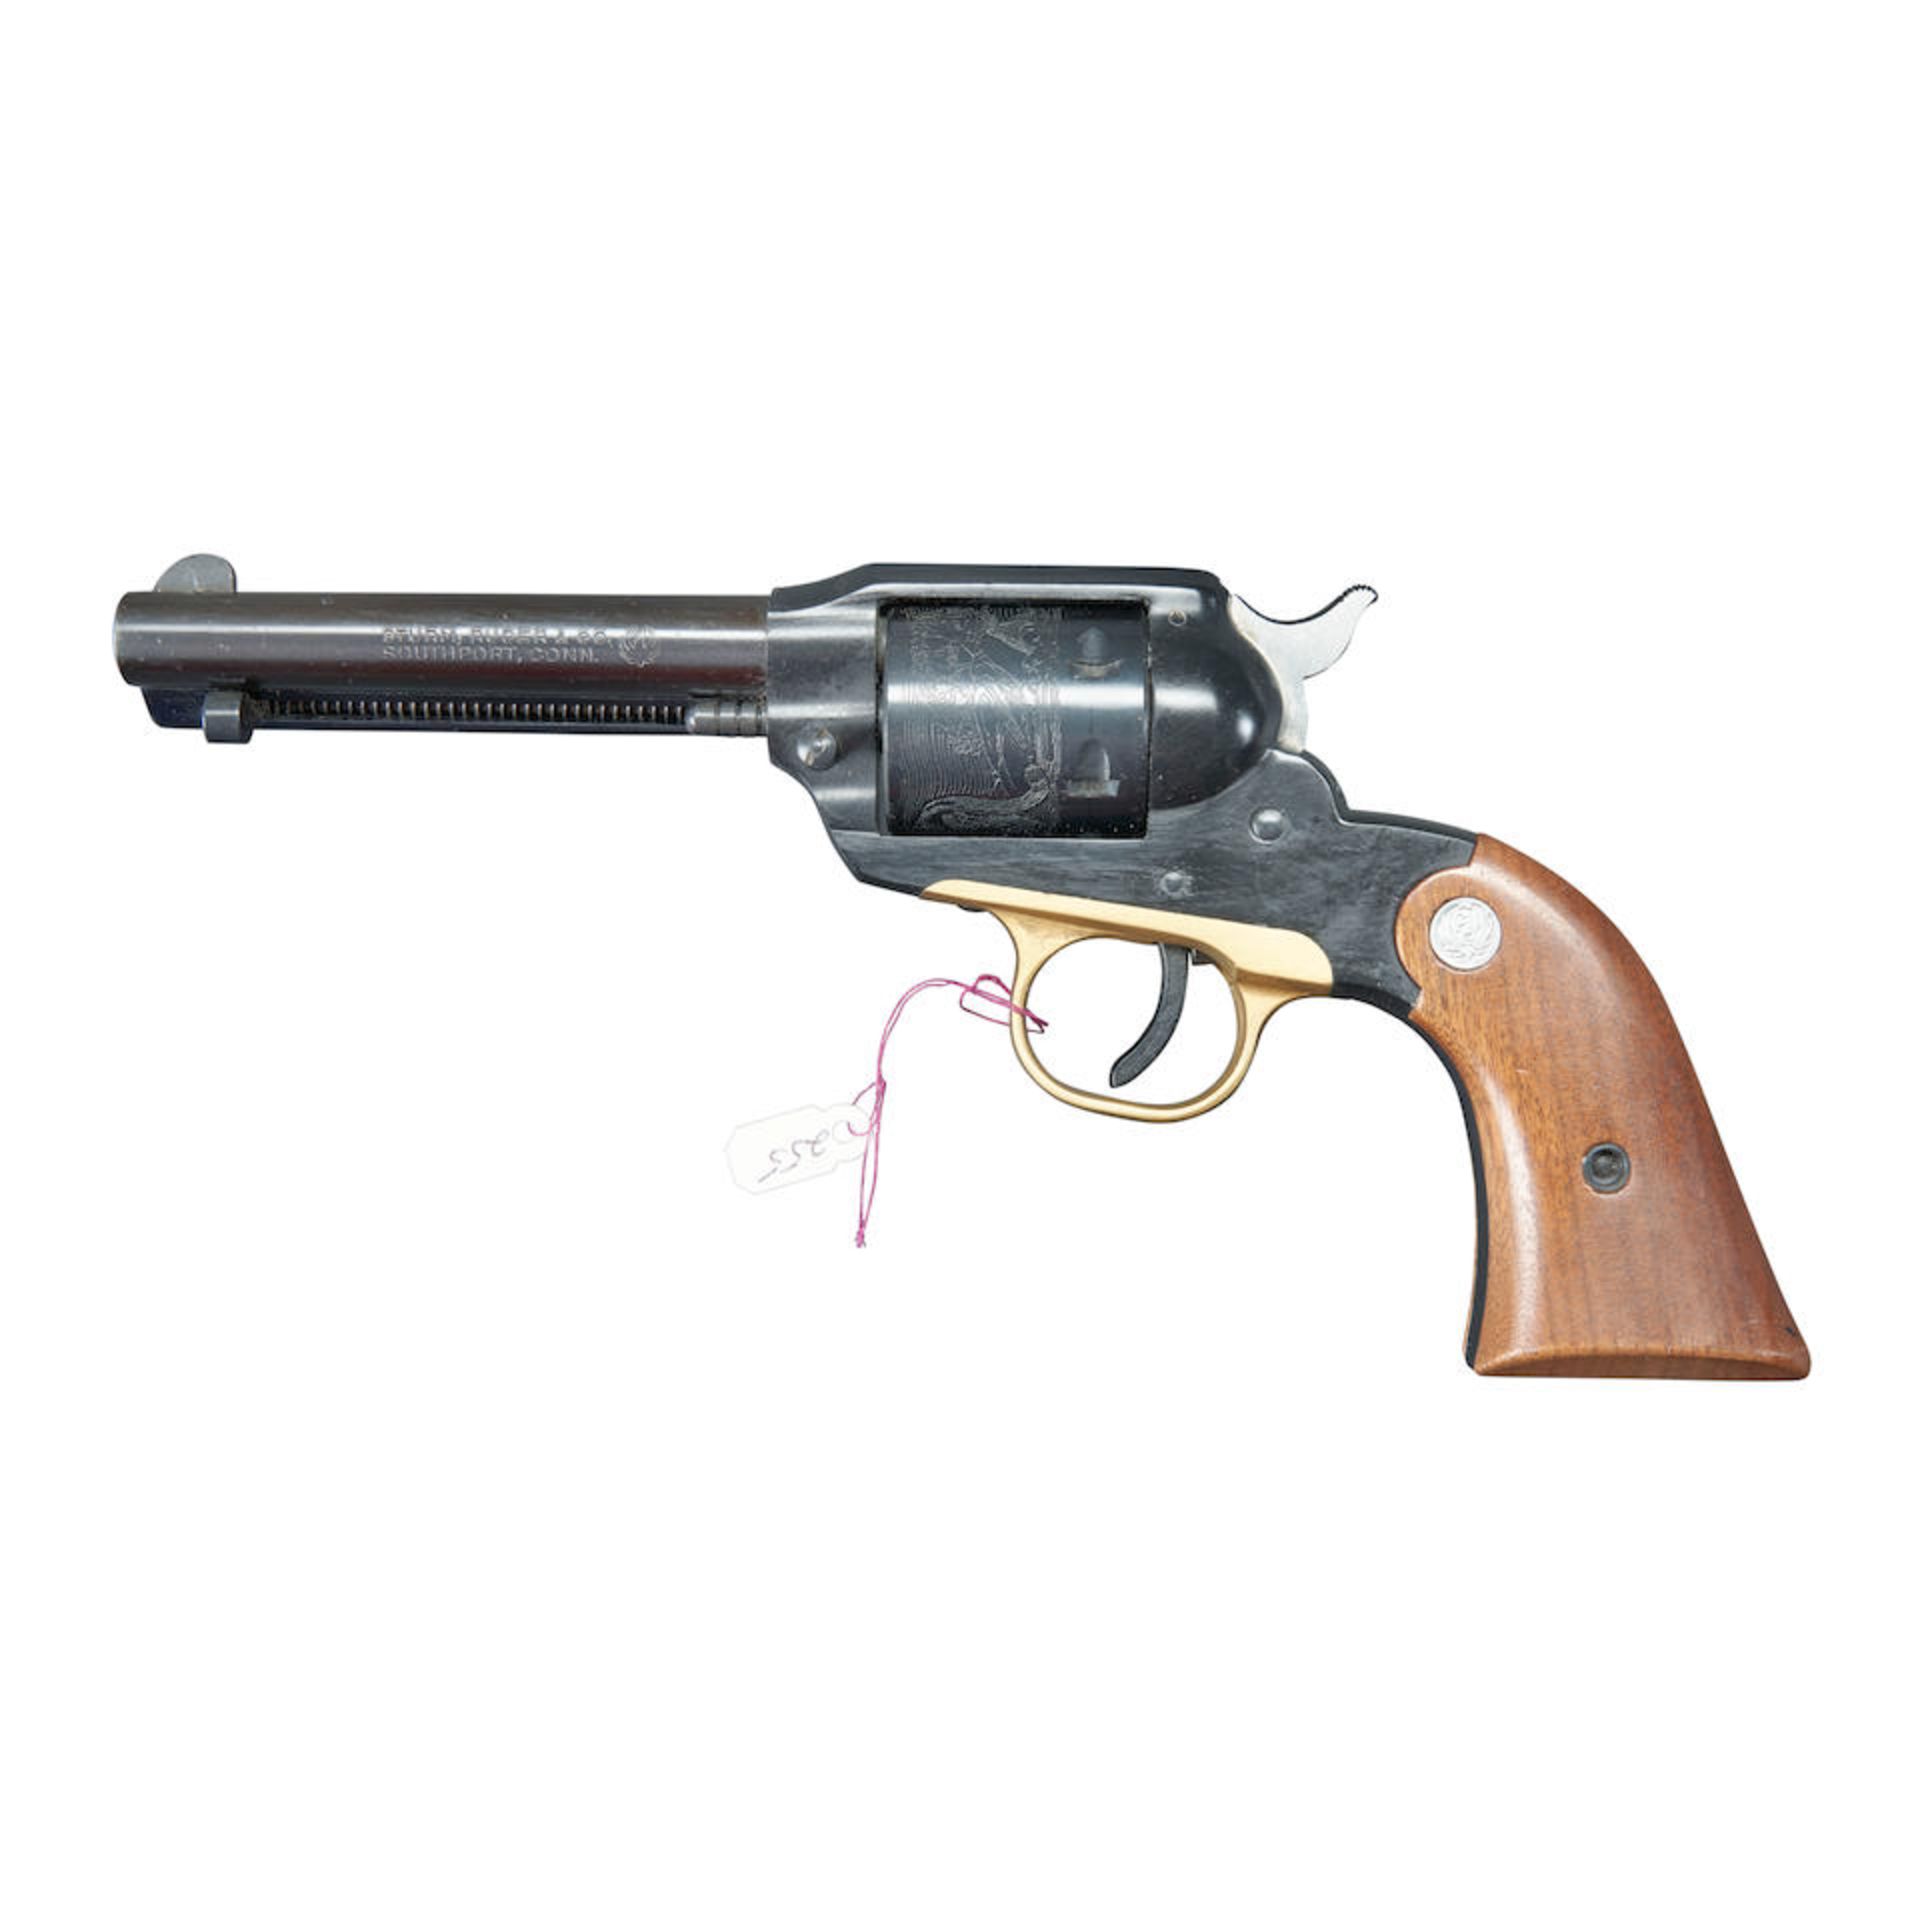 Ruger Bearcat Single Action Revolver, Curio or Relic firearm - Image 3 of 4